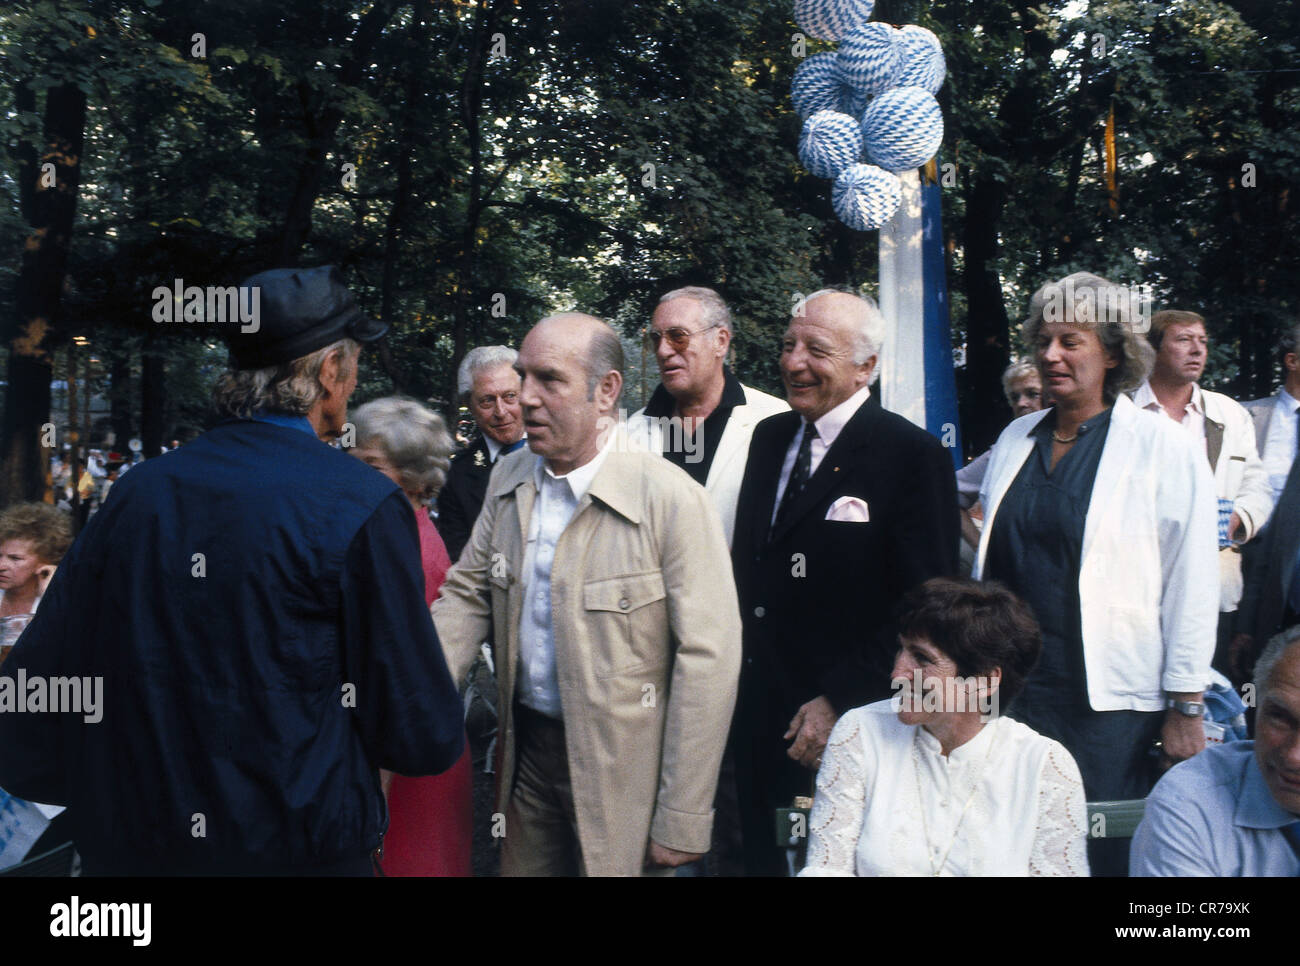 Scheel Walter 8.7.1919 - 24.8.2016, German politician (FDP), group picture, with his wife Mildred, Georg Schropp (husband of actress Erni Singerl), film producer Helmut Ringelmann and author Siegfried 'Sigi' Sommer in a beer garden, brithday party of Siegfried 'Sigi' Sommer, Munich, August 1984, Stock Photo